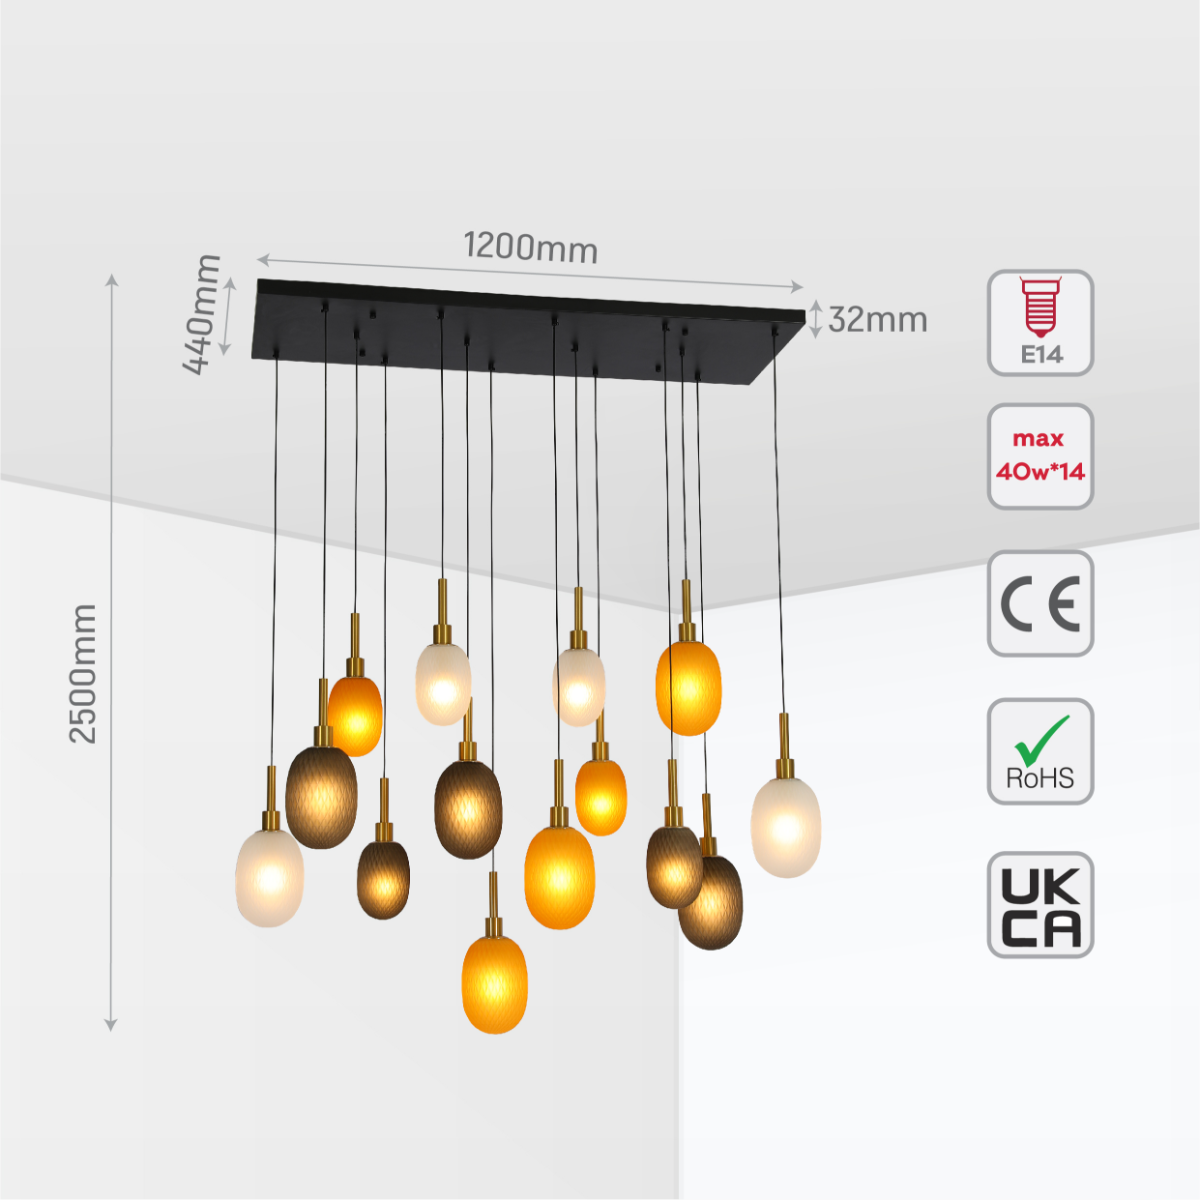 Size and certifications of Grand Space Multi-Pendant Ceiling Light 150-19028